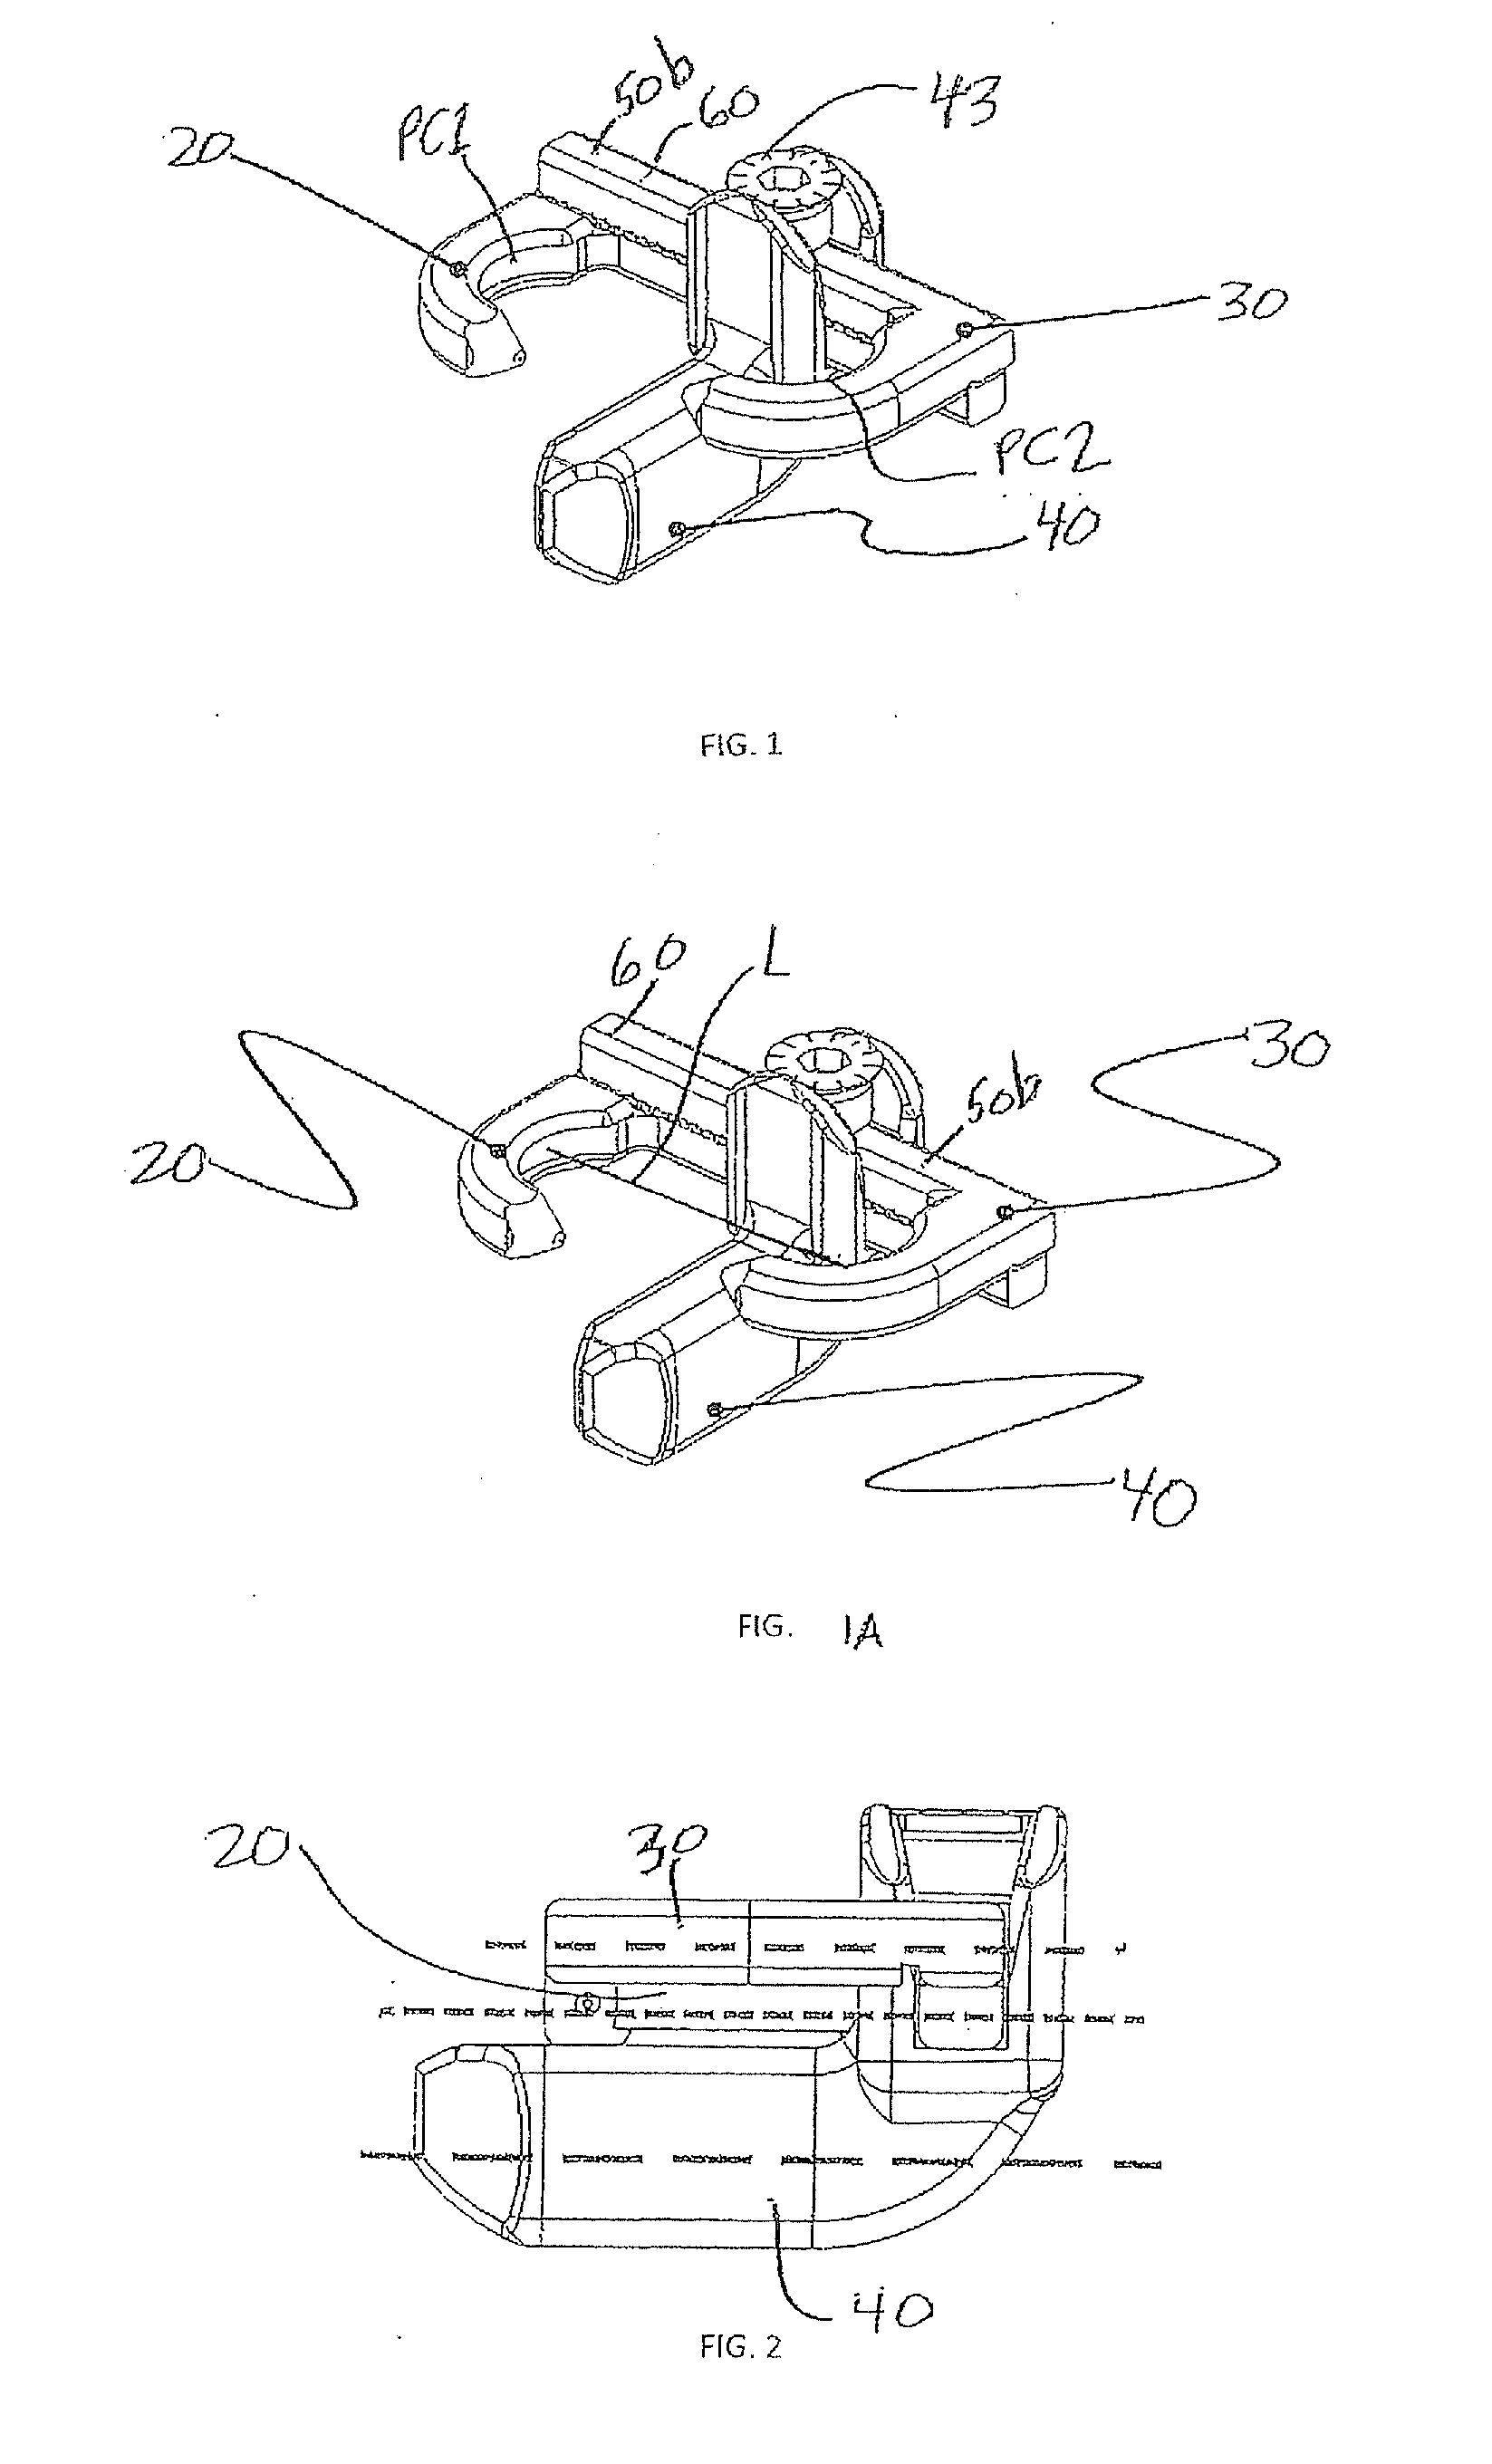 Bony structure fixation clamp